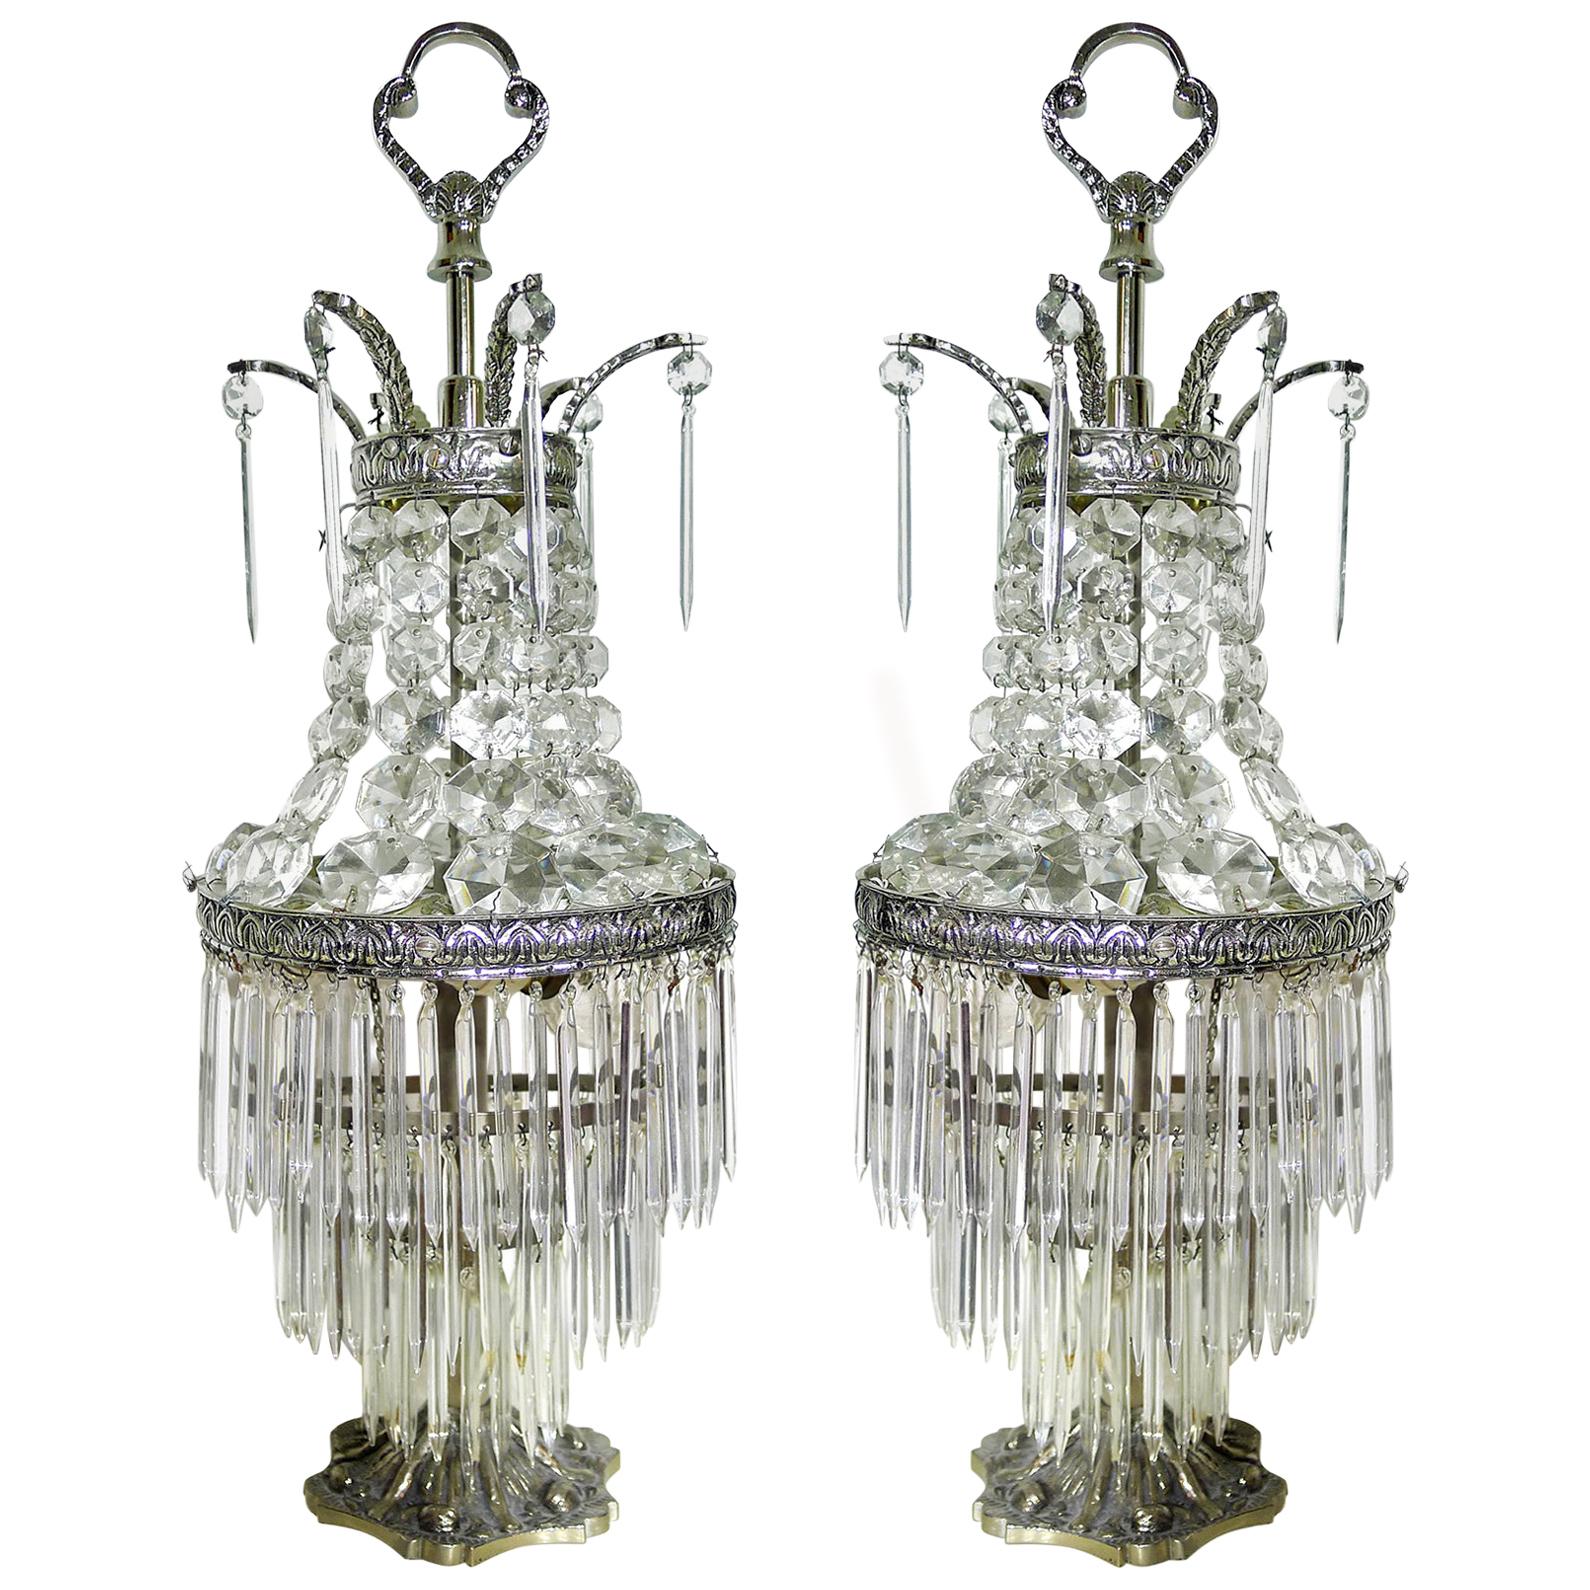 Pair of French Hollywood Regency Empire Silver Nickel & Crystal Table Lamps 1920 For Sale 1